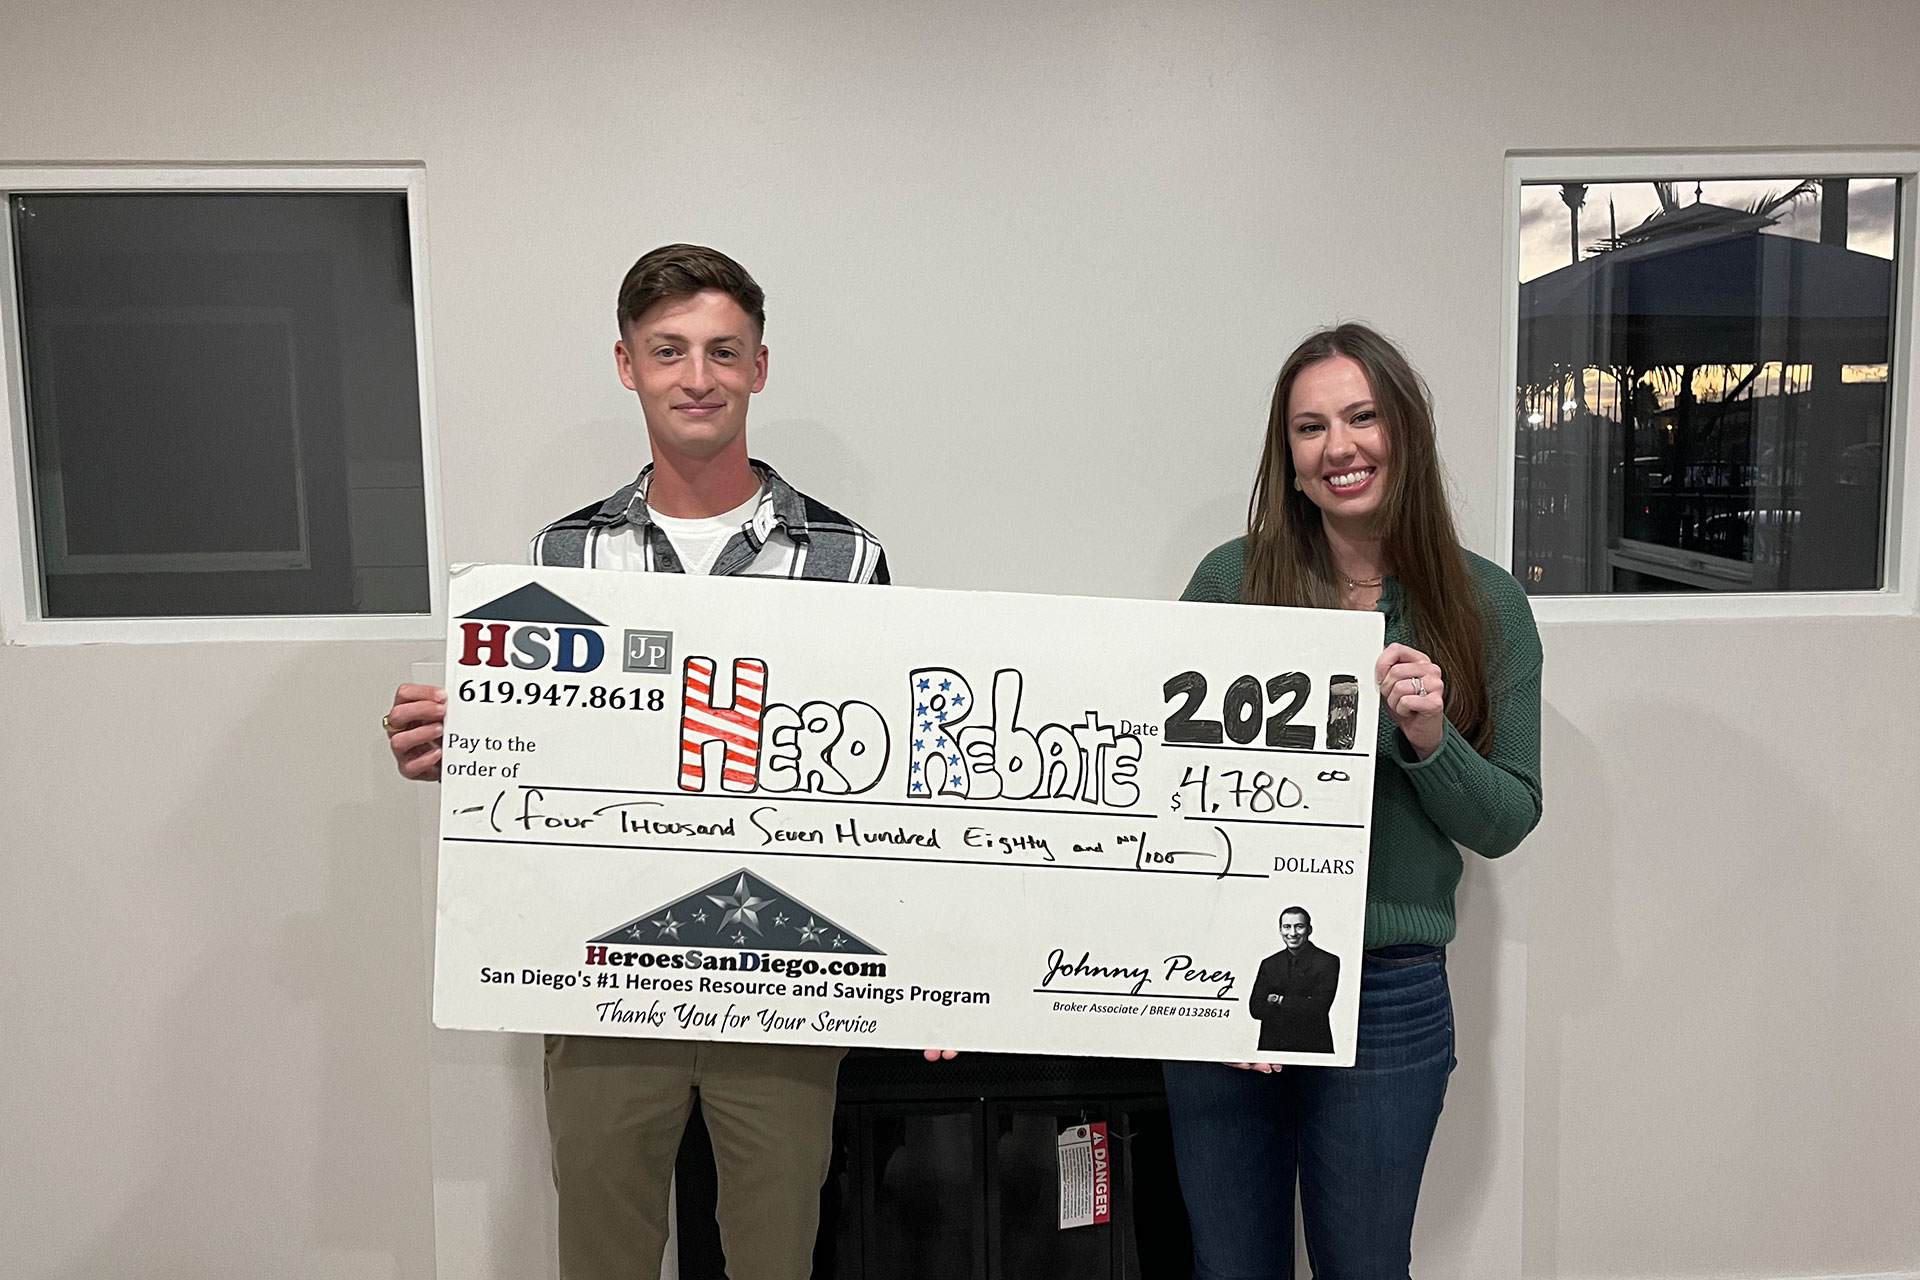 Man and woman standing together and holding a Hero Rebate check for $4,780.